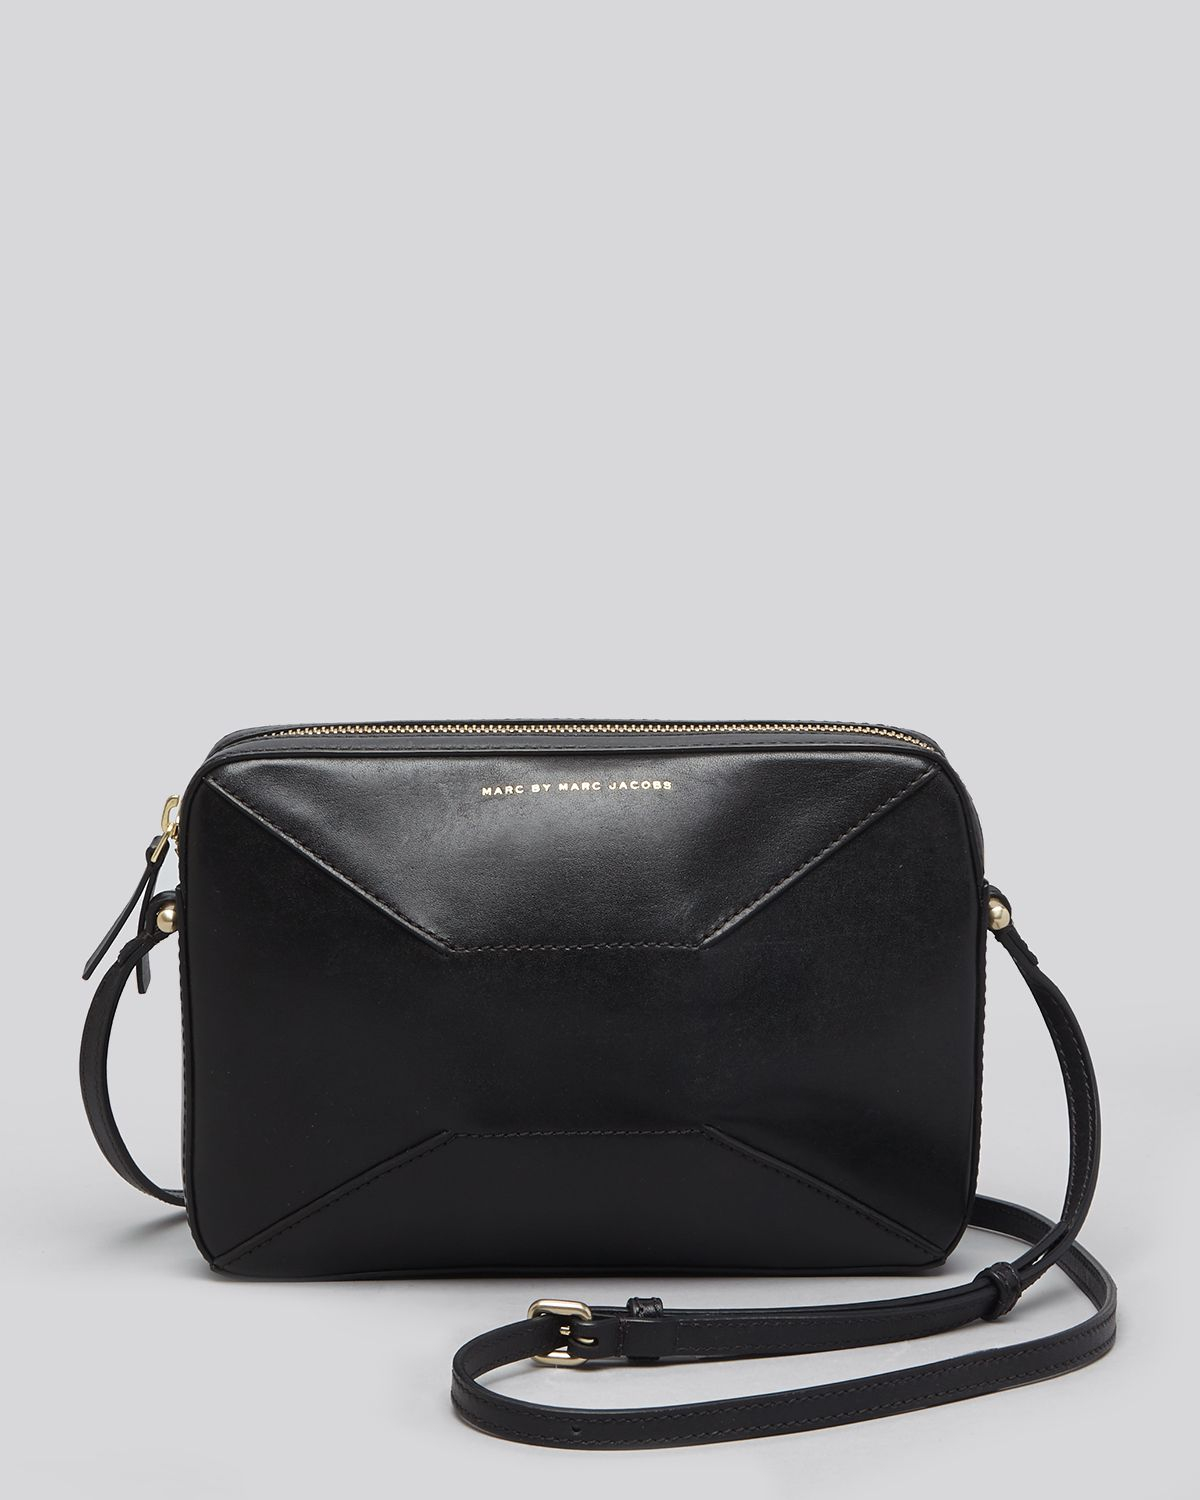 Lyst - Marc By Marc Jacobs Crossbody Hands Off Alex in Black